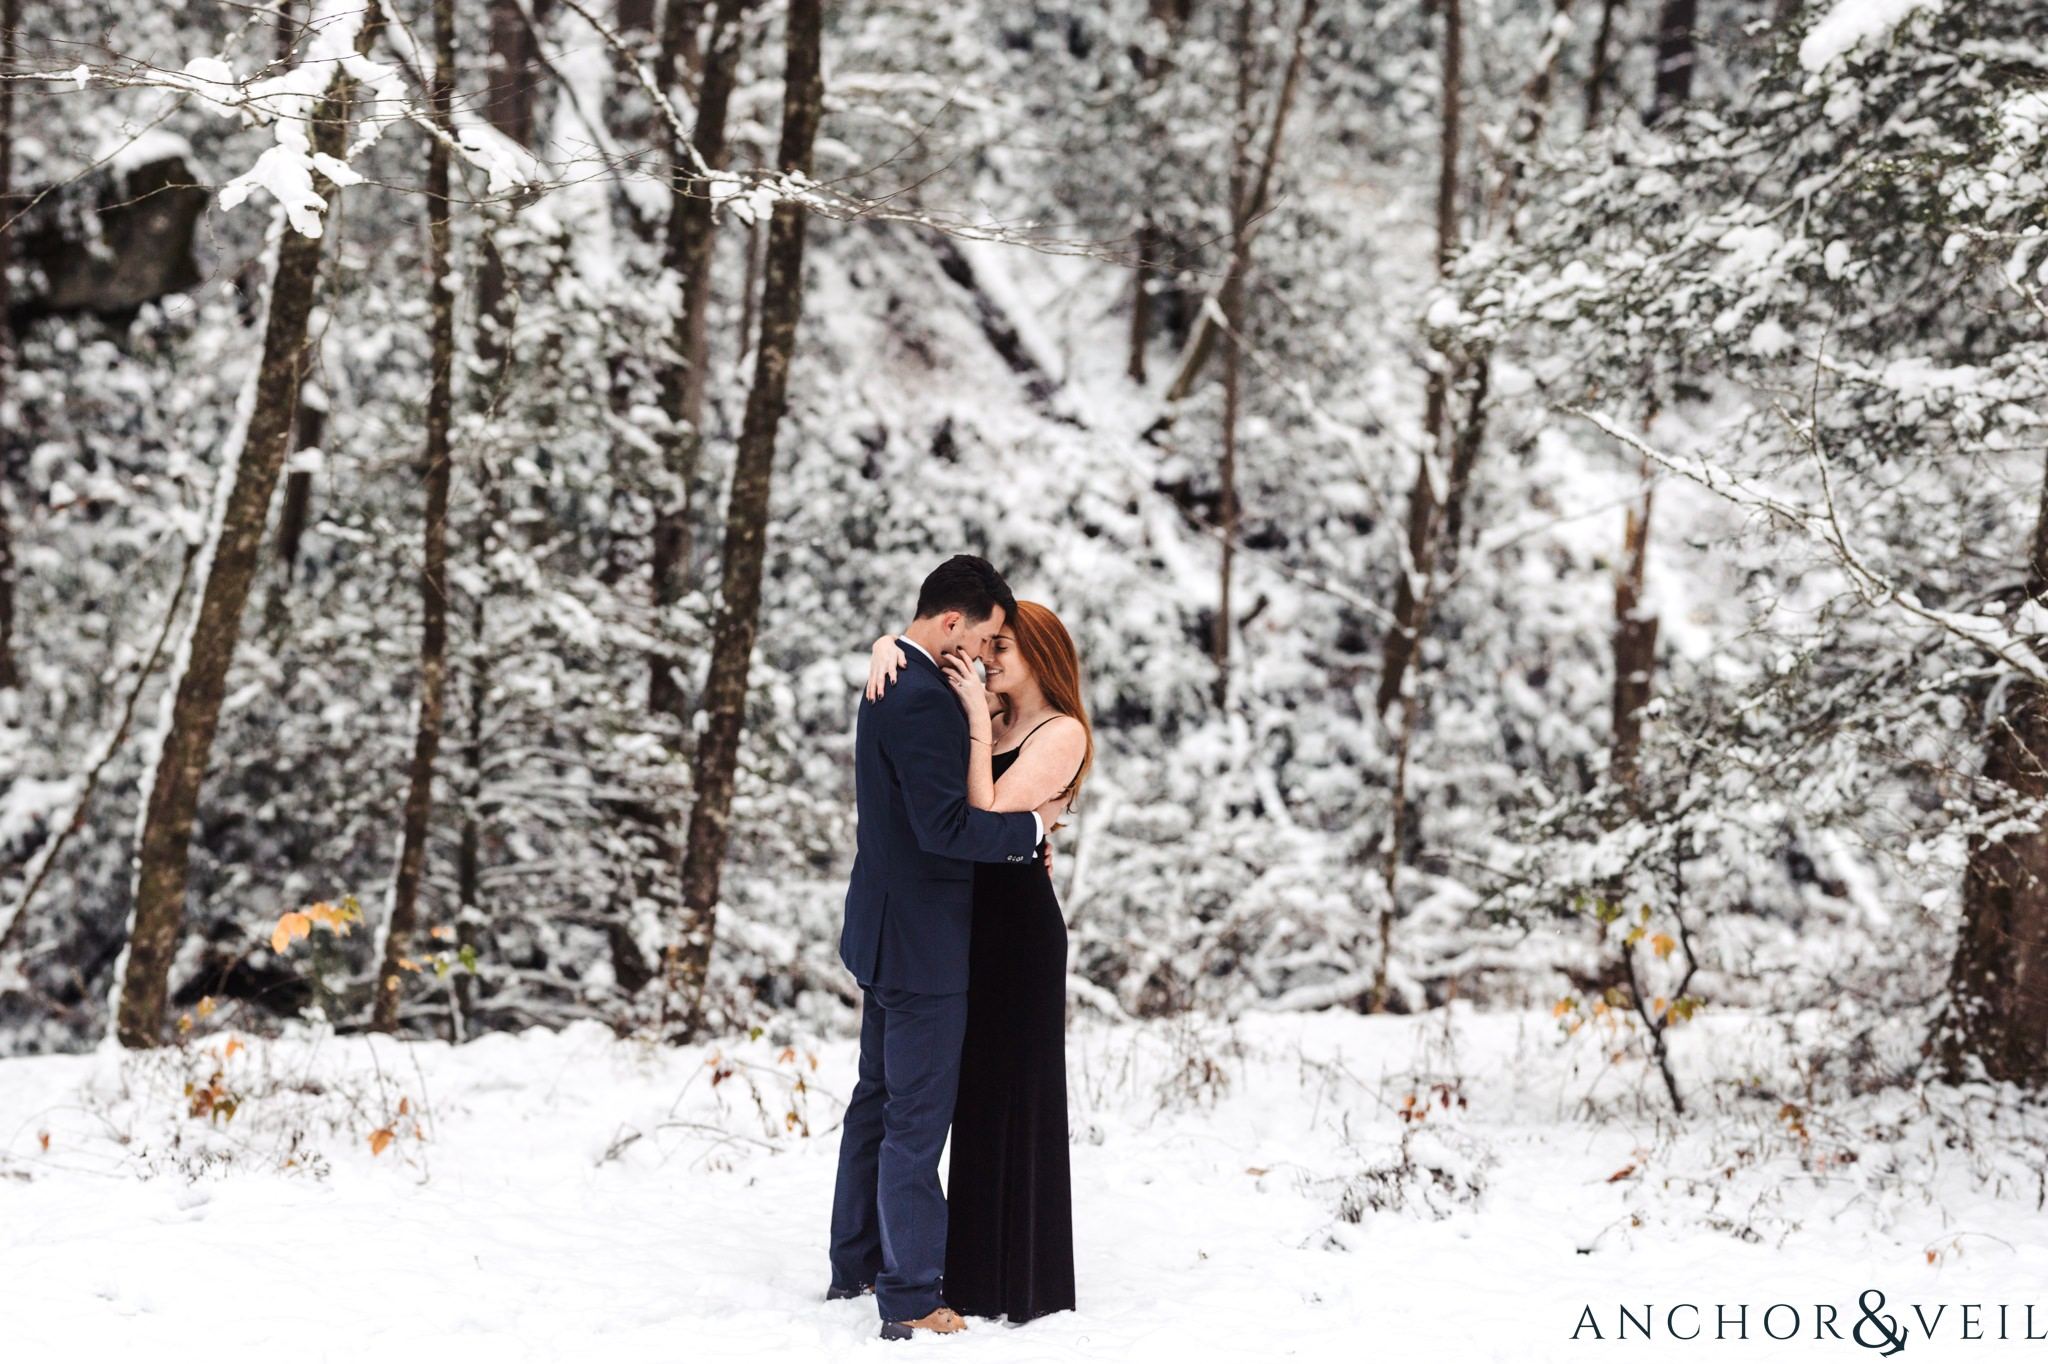 in the trees during their Snowy Asheville Engagement Session